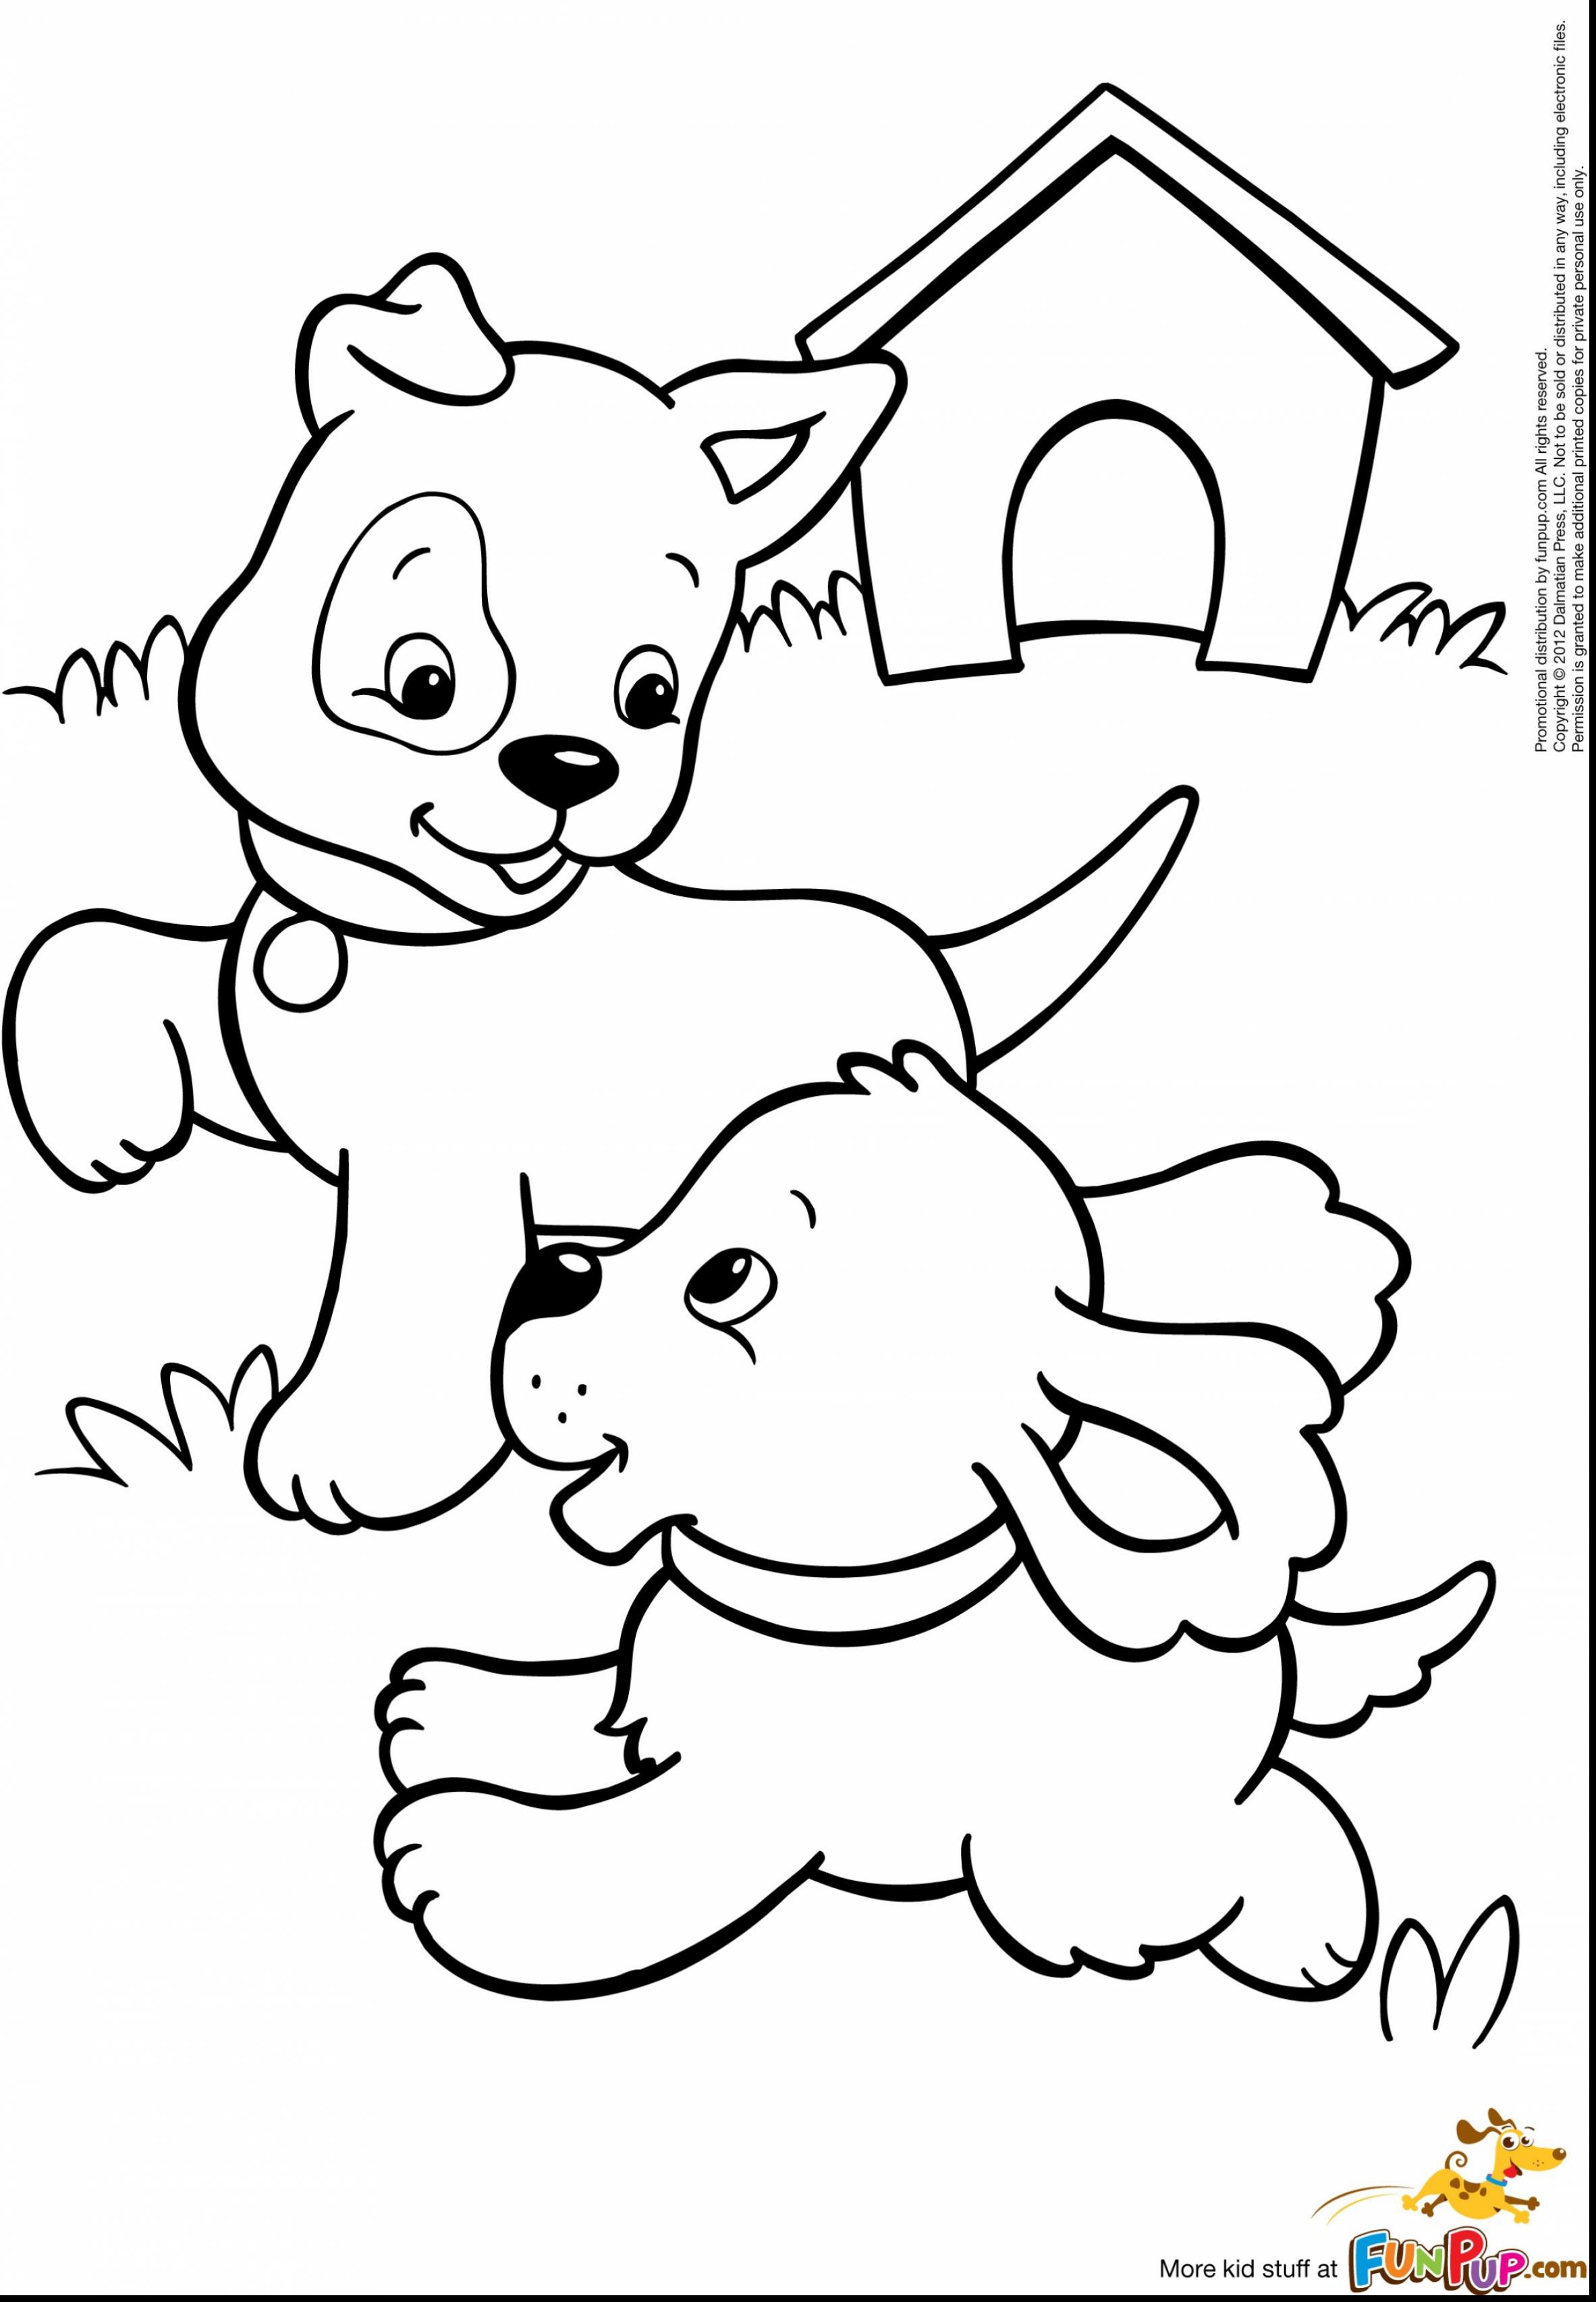 Printable Puppy Coloring Pages Wallpaper